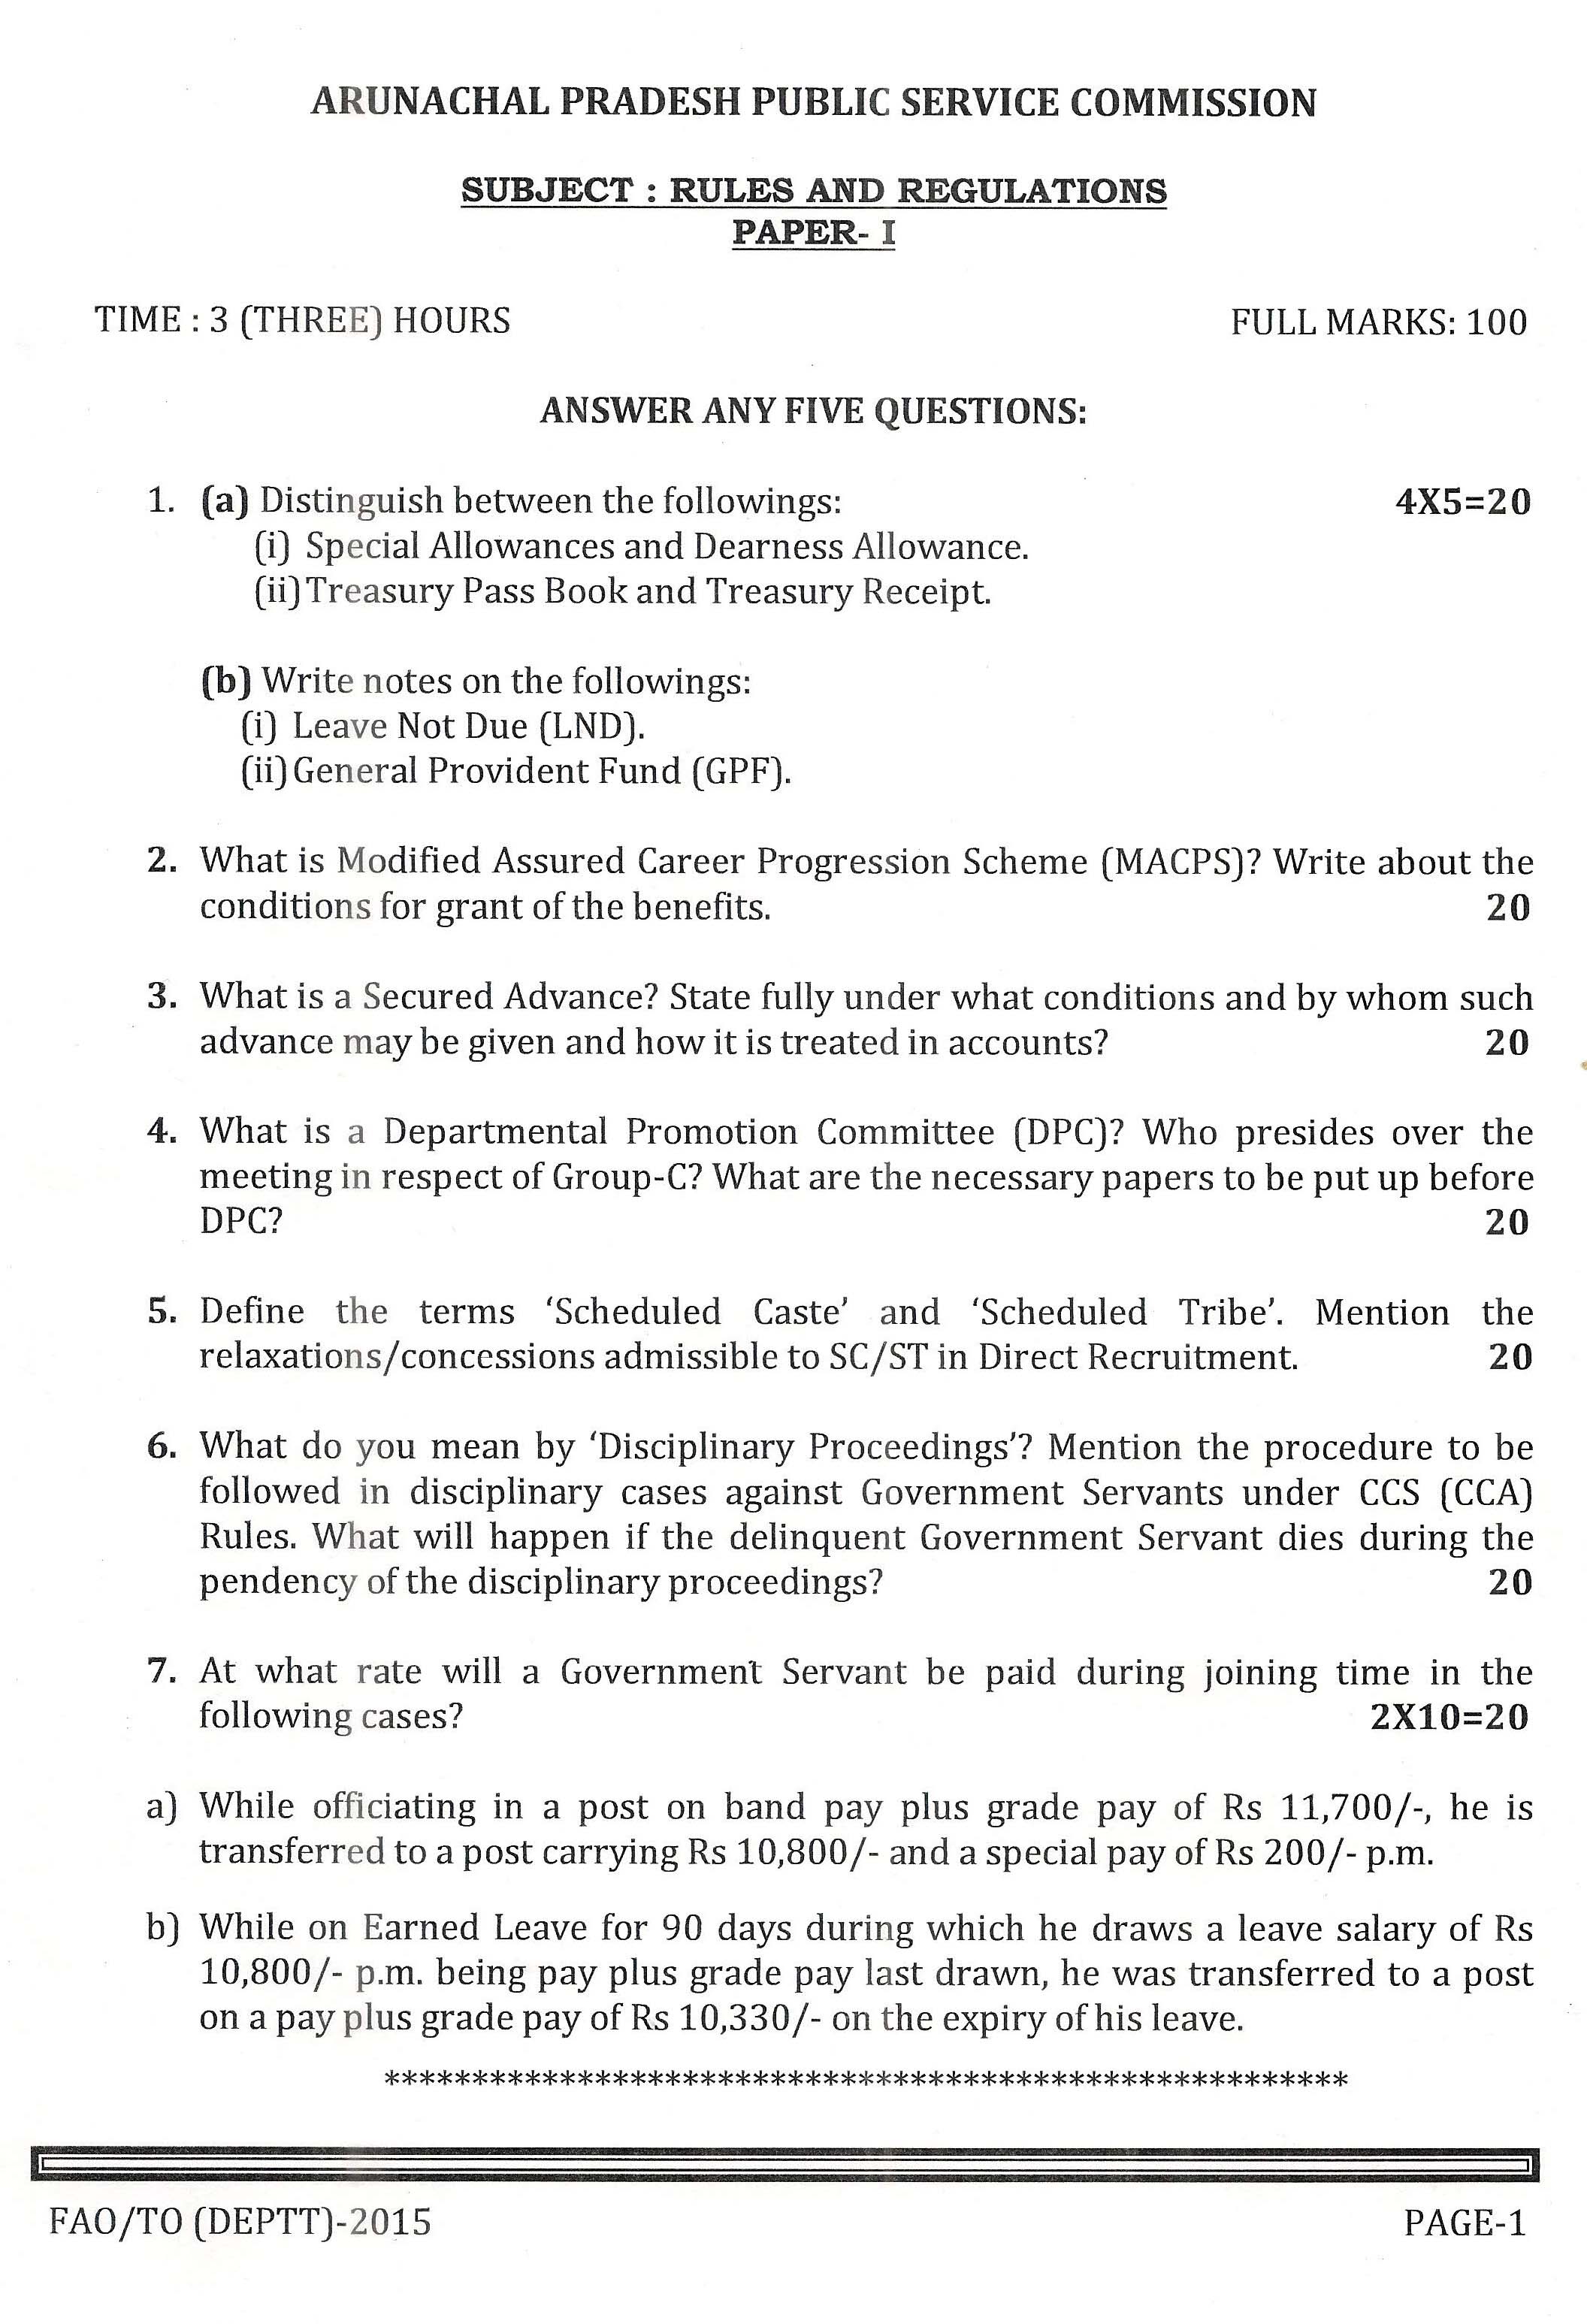 APPSC FAO TO Department Exam 2015 Rules and Regulations Paper I 1